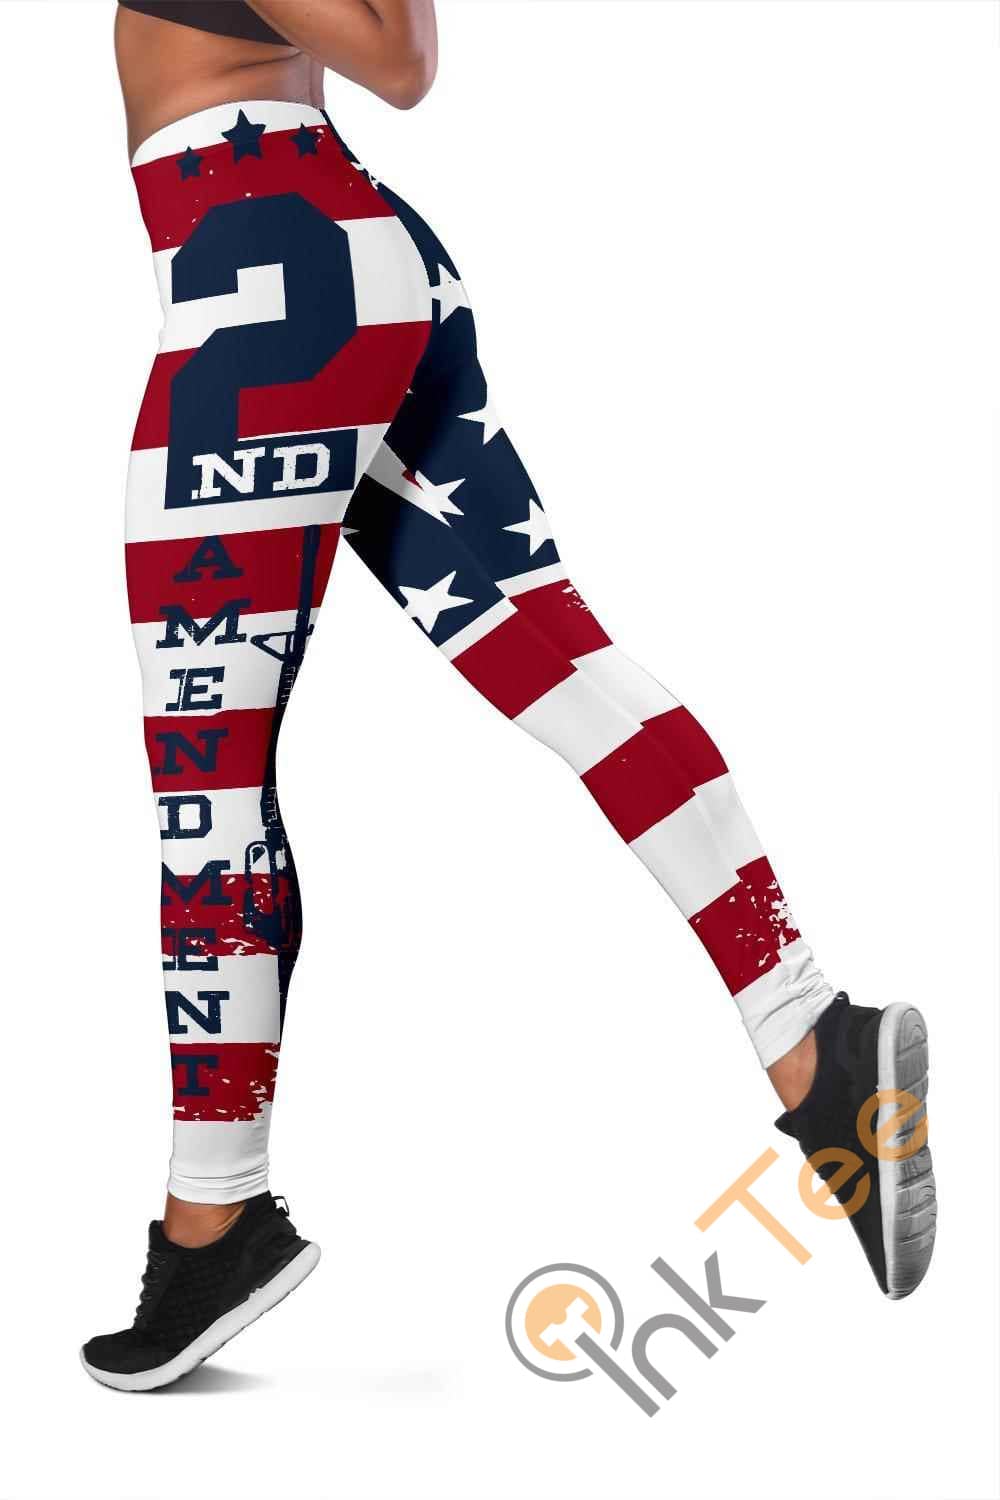 Inktee Store - 2Nd Amendment 3D All Over Print For Yoga Fitness Women'S Leggings Image